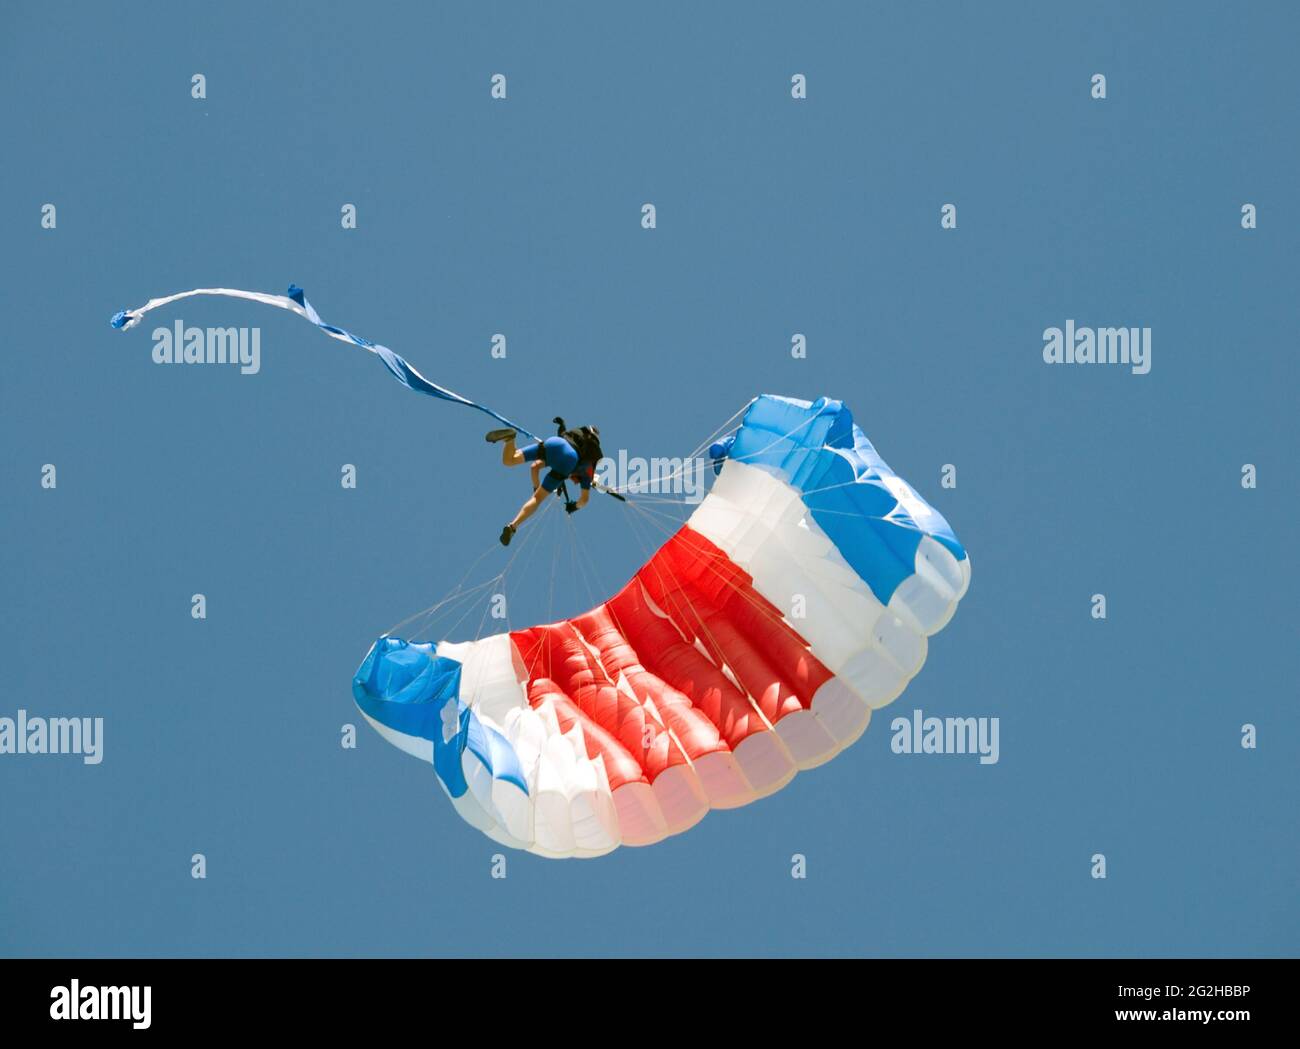 Skydiver hanging on parachute in air Stock Photo